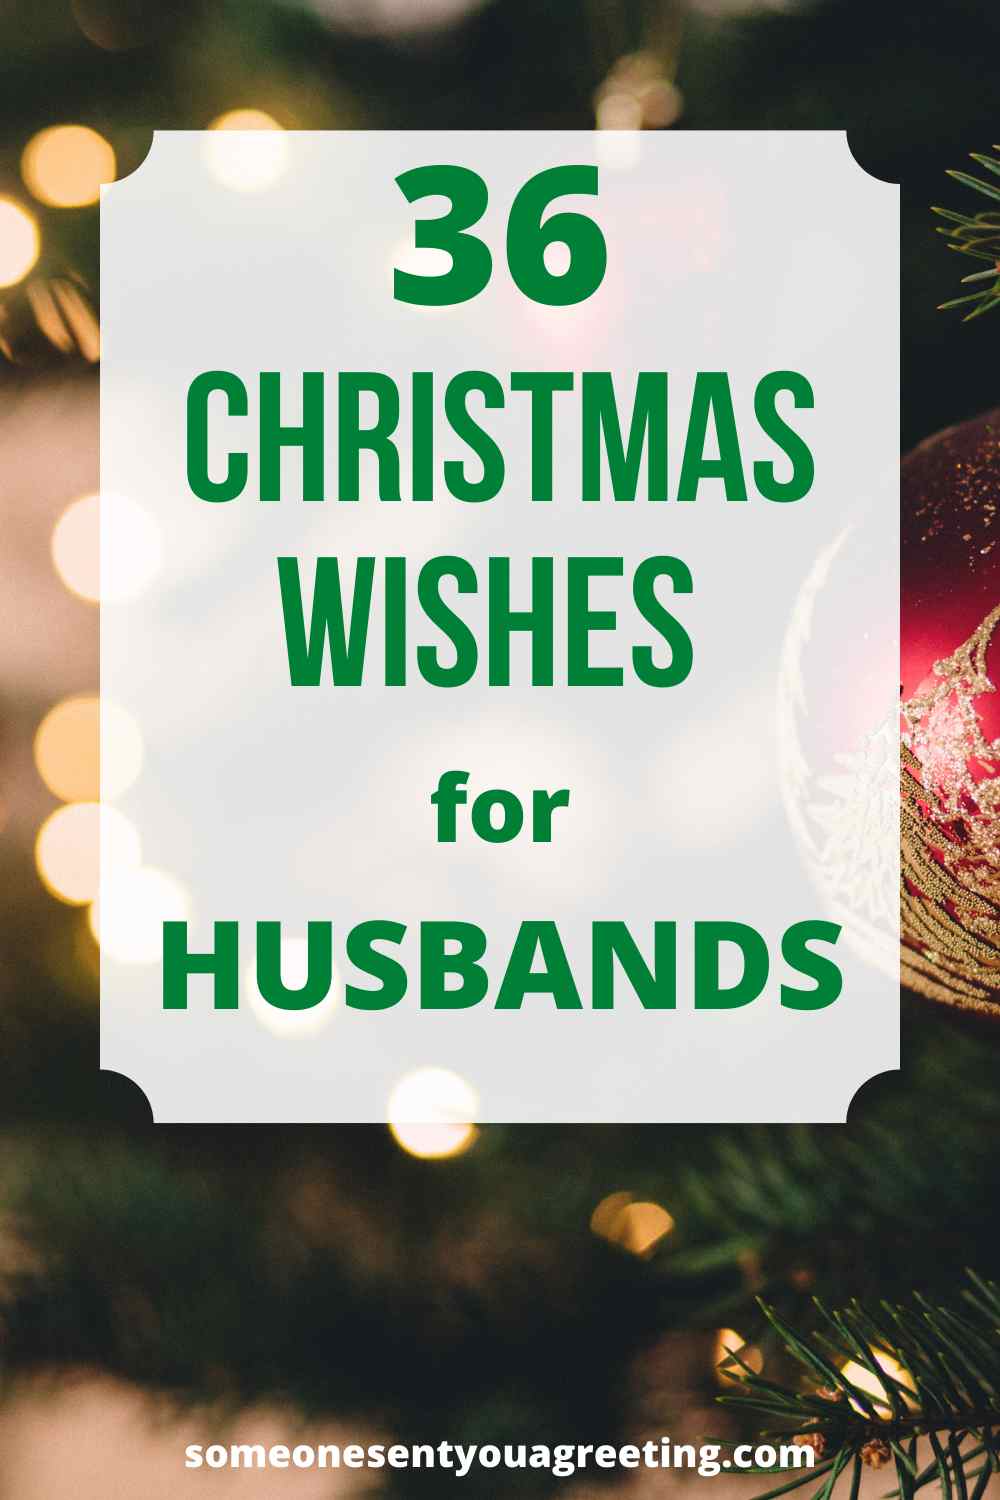 36 Christmas Wishes for Husband